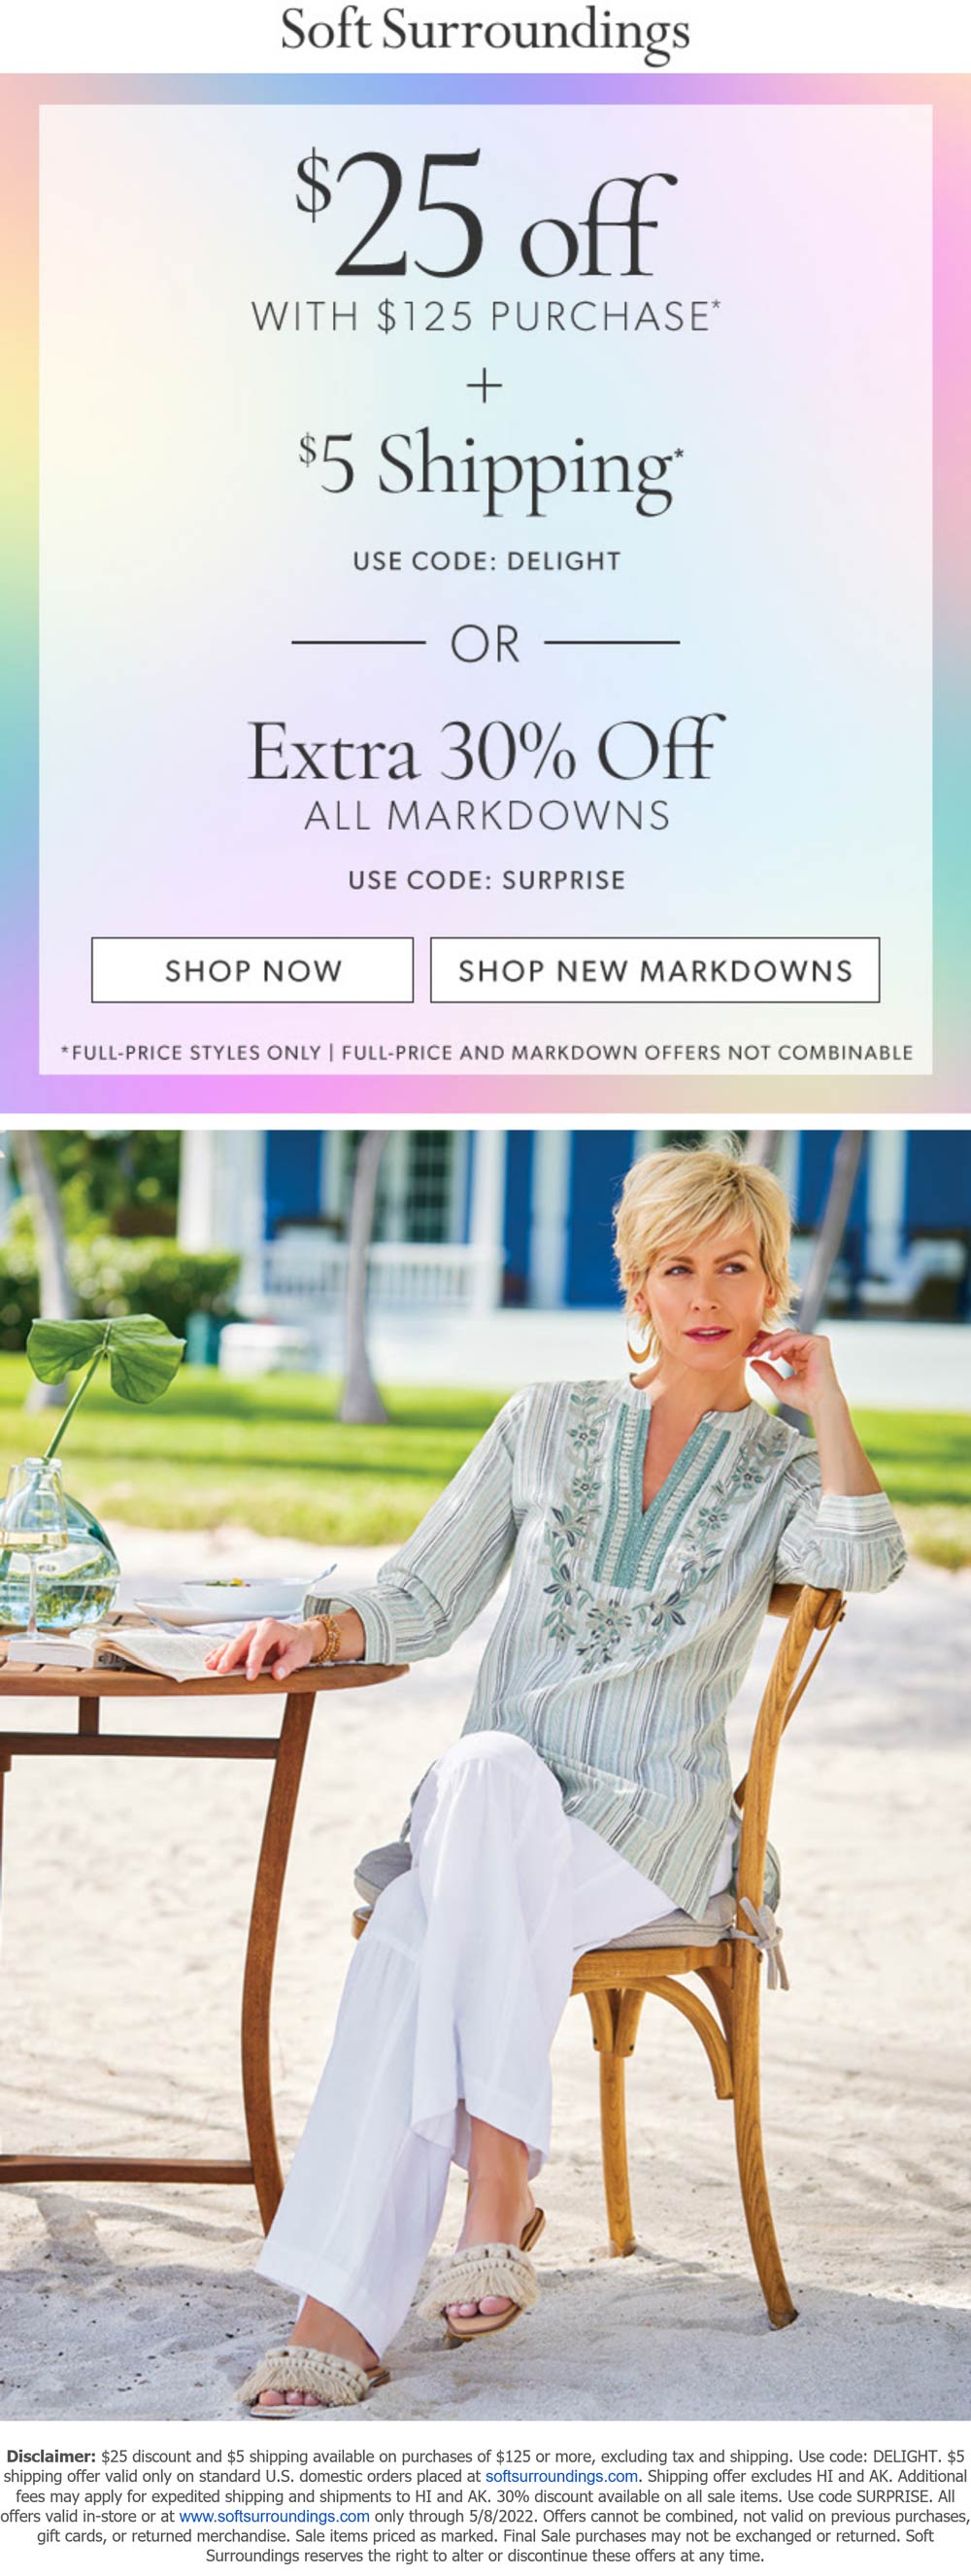 Soft Surroundings stores Coupon  $25 off $125 & 30% off sale items at Soft Surroundings via promo code SURPRISE #softsurroundings 